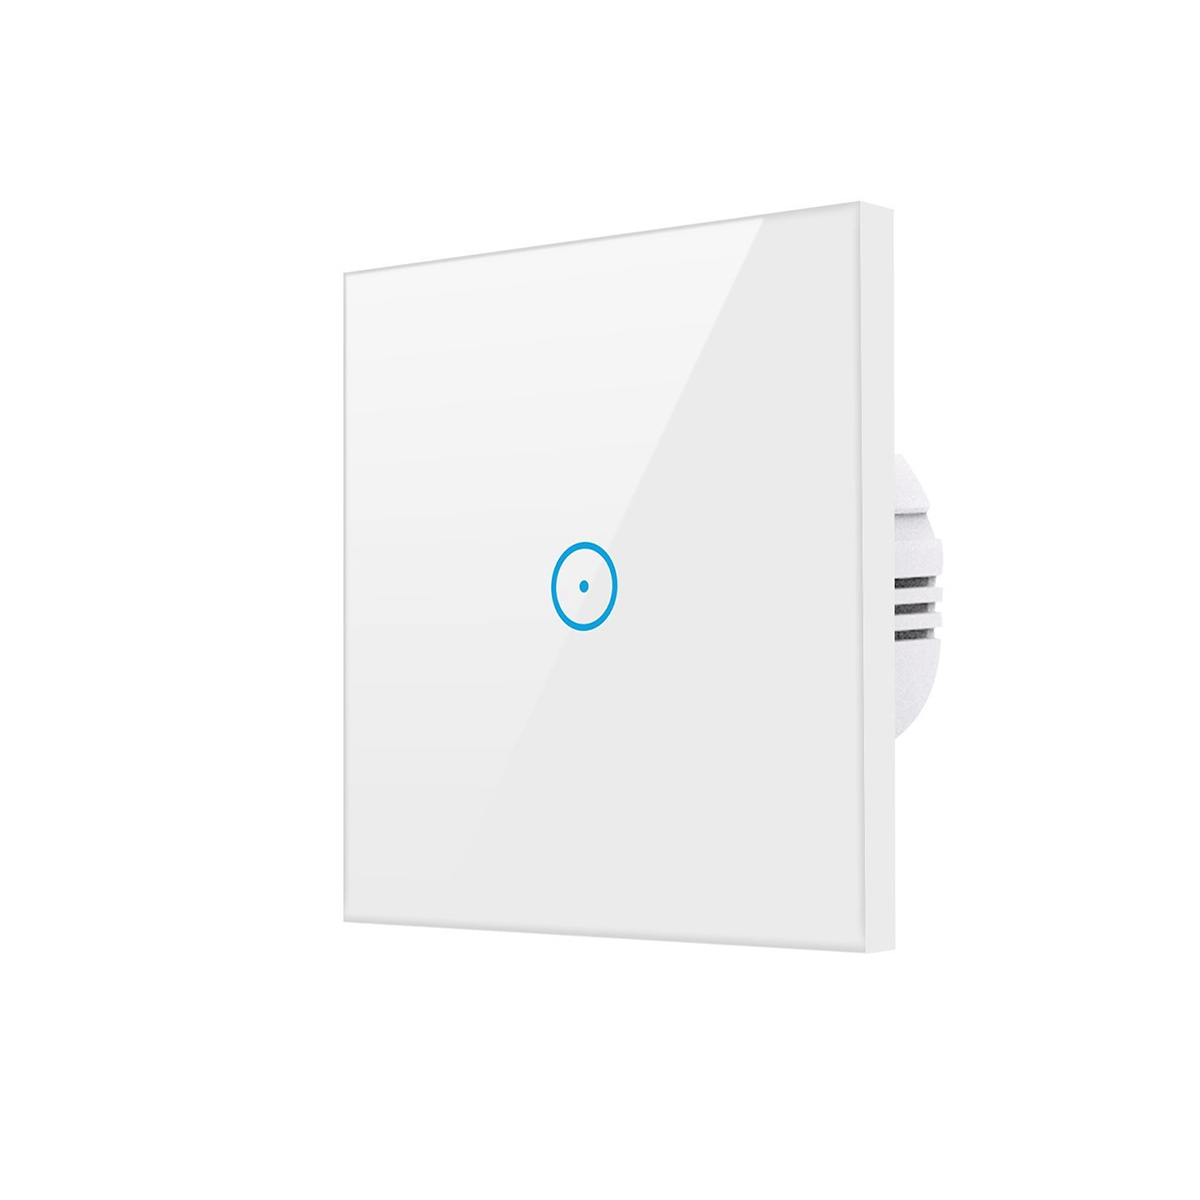 123-Gang-Smart-Home-WiFi-Touch-Light-Wall-Switch-Panel-For-Alexa-Google-Home-Assistant-1418937-10